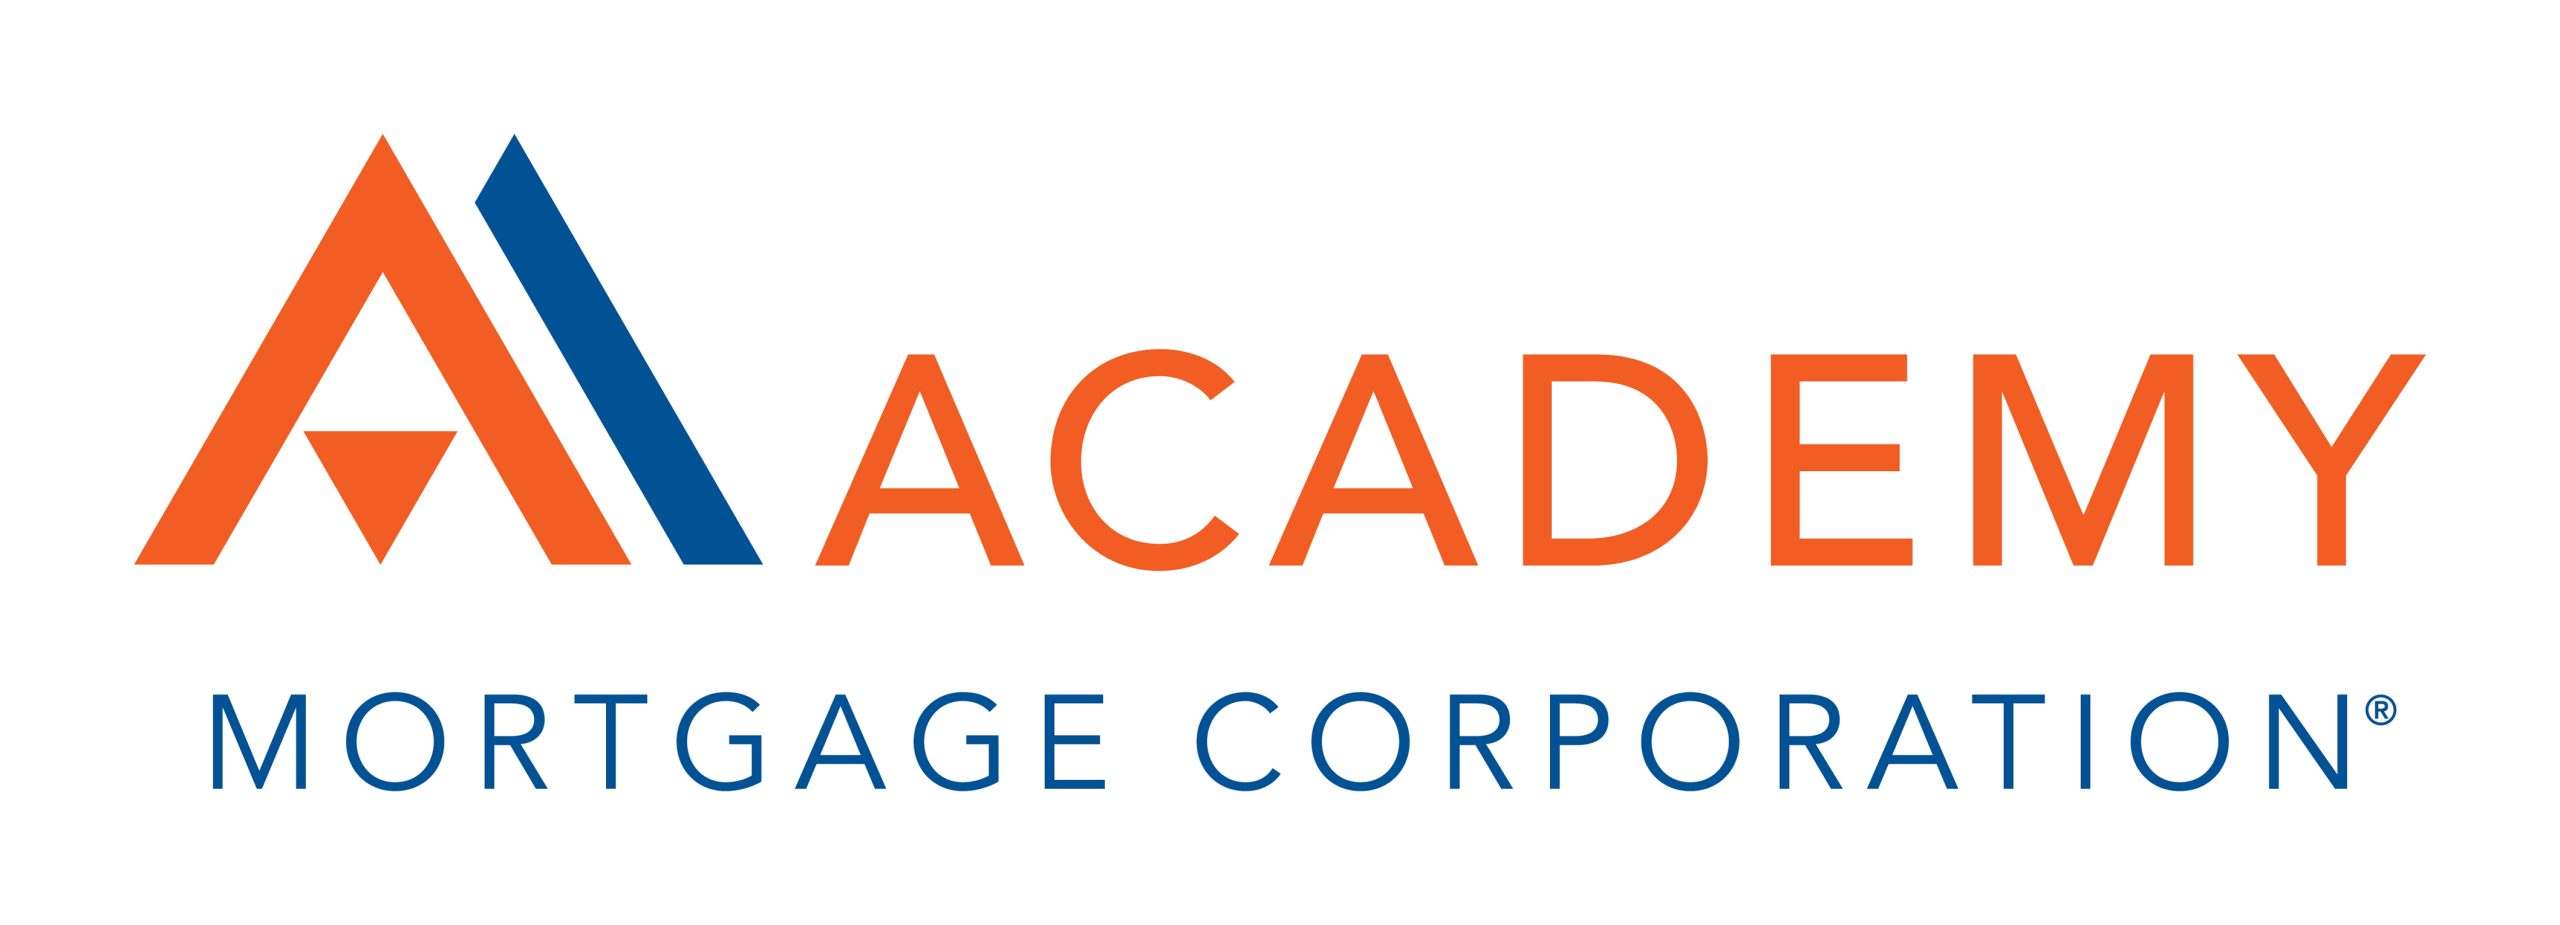 Manager, Diversity & Inclusion Lending, Producing Logo